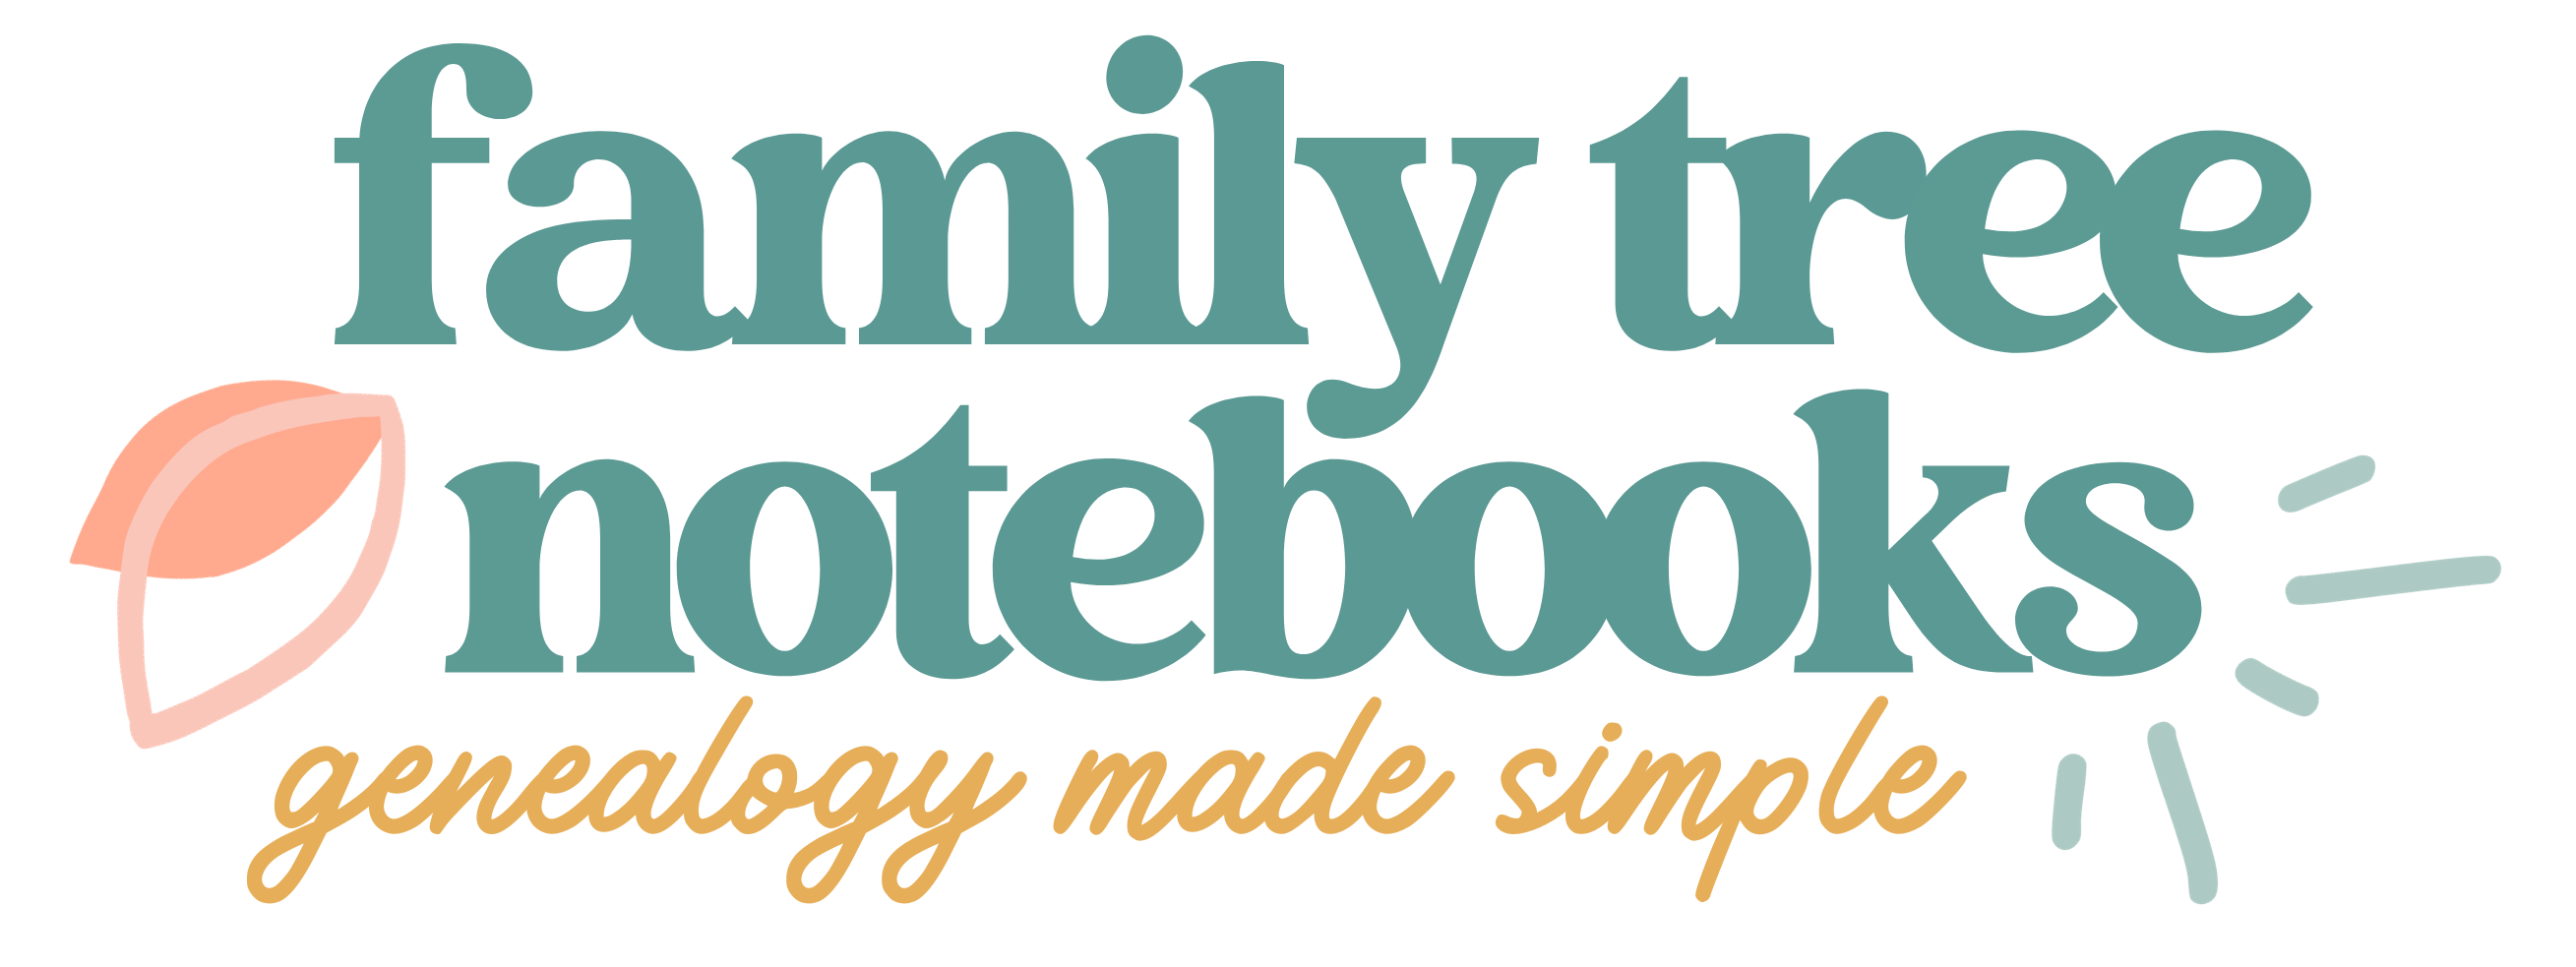 Step by Step – Family Tree Notebooks